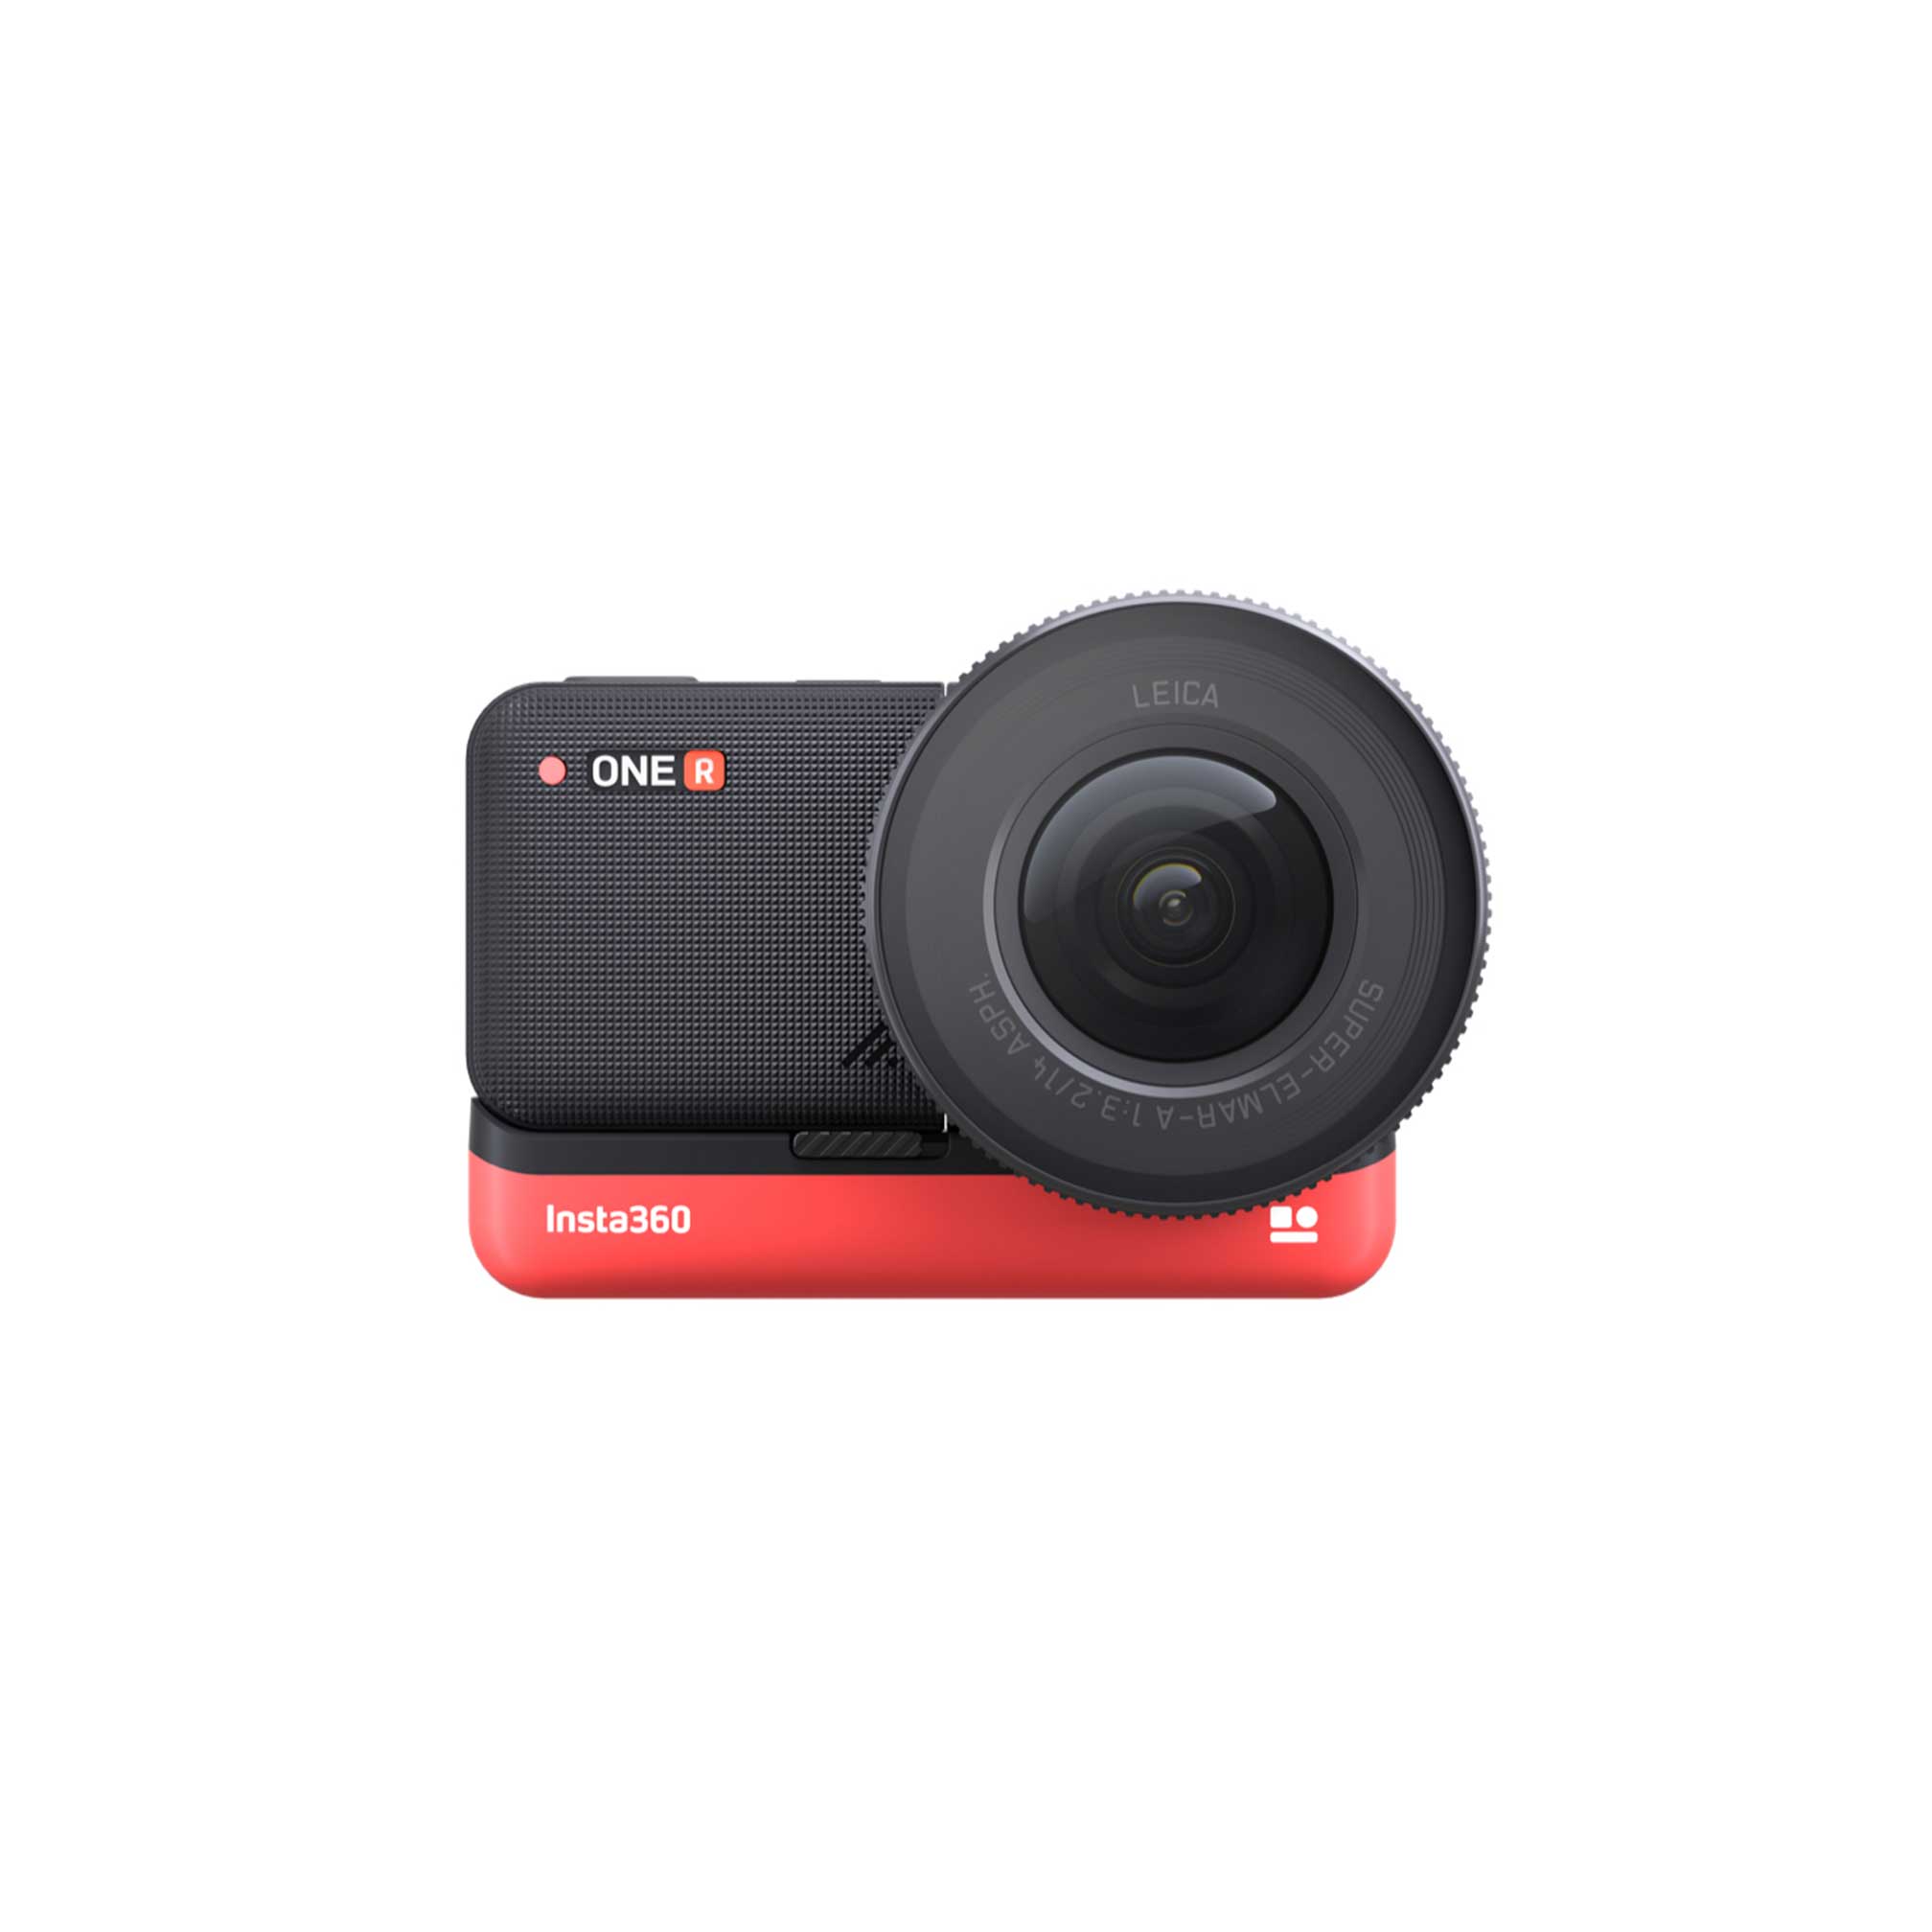 Insta360 One R 1inch Edition Best Quality Action Cam | Urban Gadgets PH